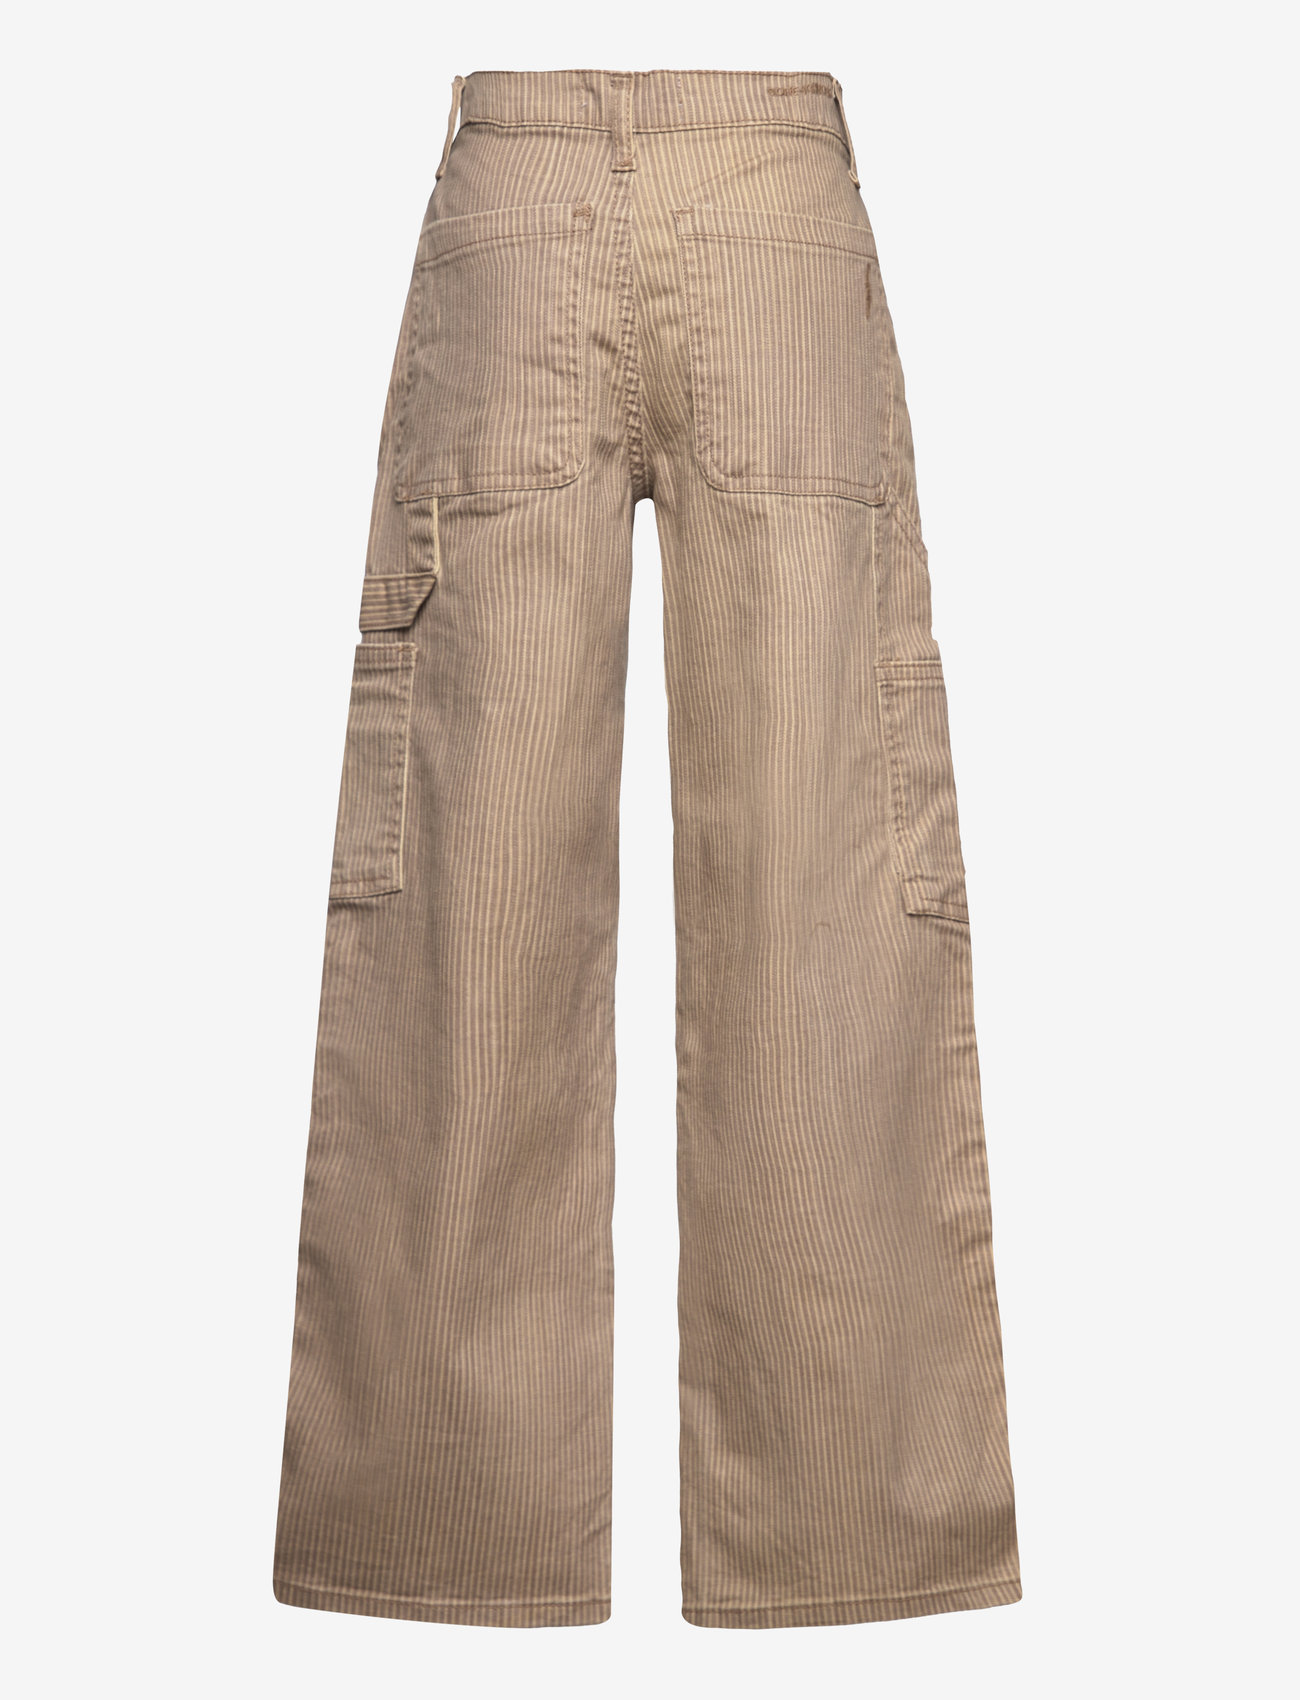 Sofie Schnoor Young - Pants - brede jeans - warm grey & light sand - 1